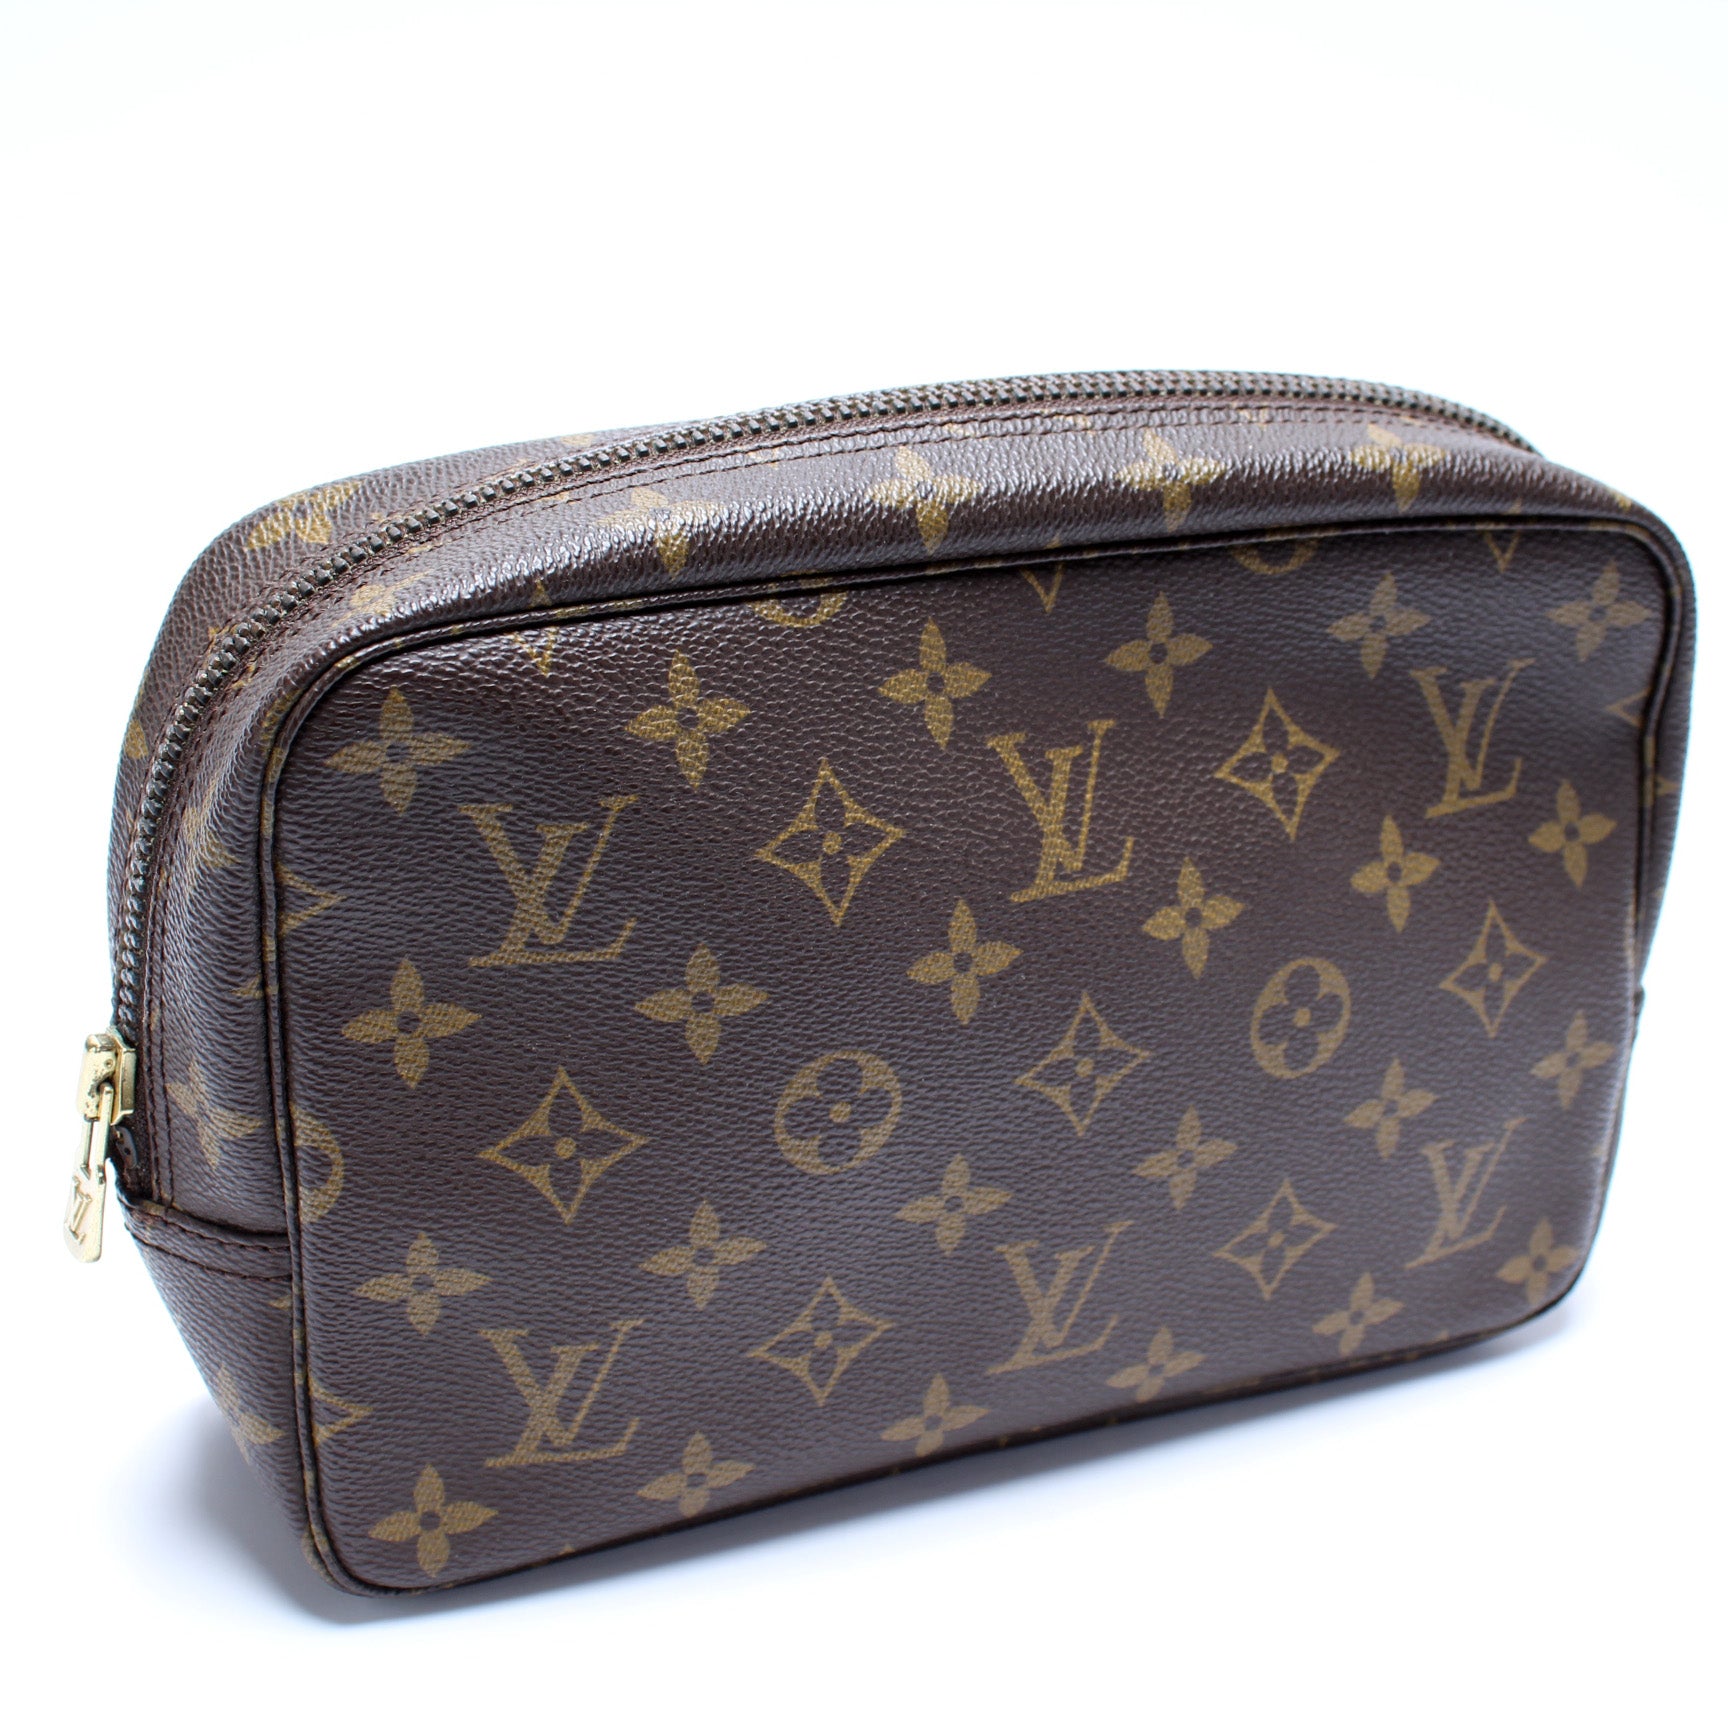 Monogram Trousse 23 Cosmetic Bag (Authentic Pre-Owned)